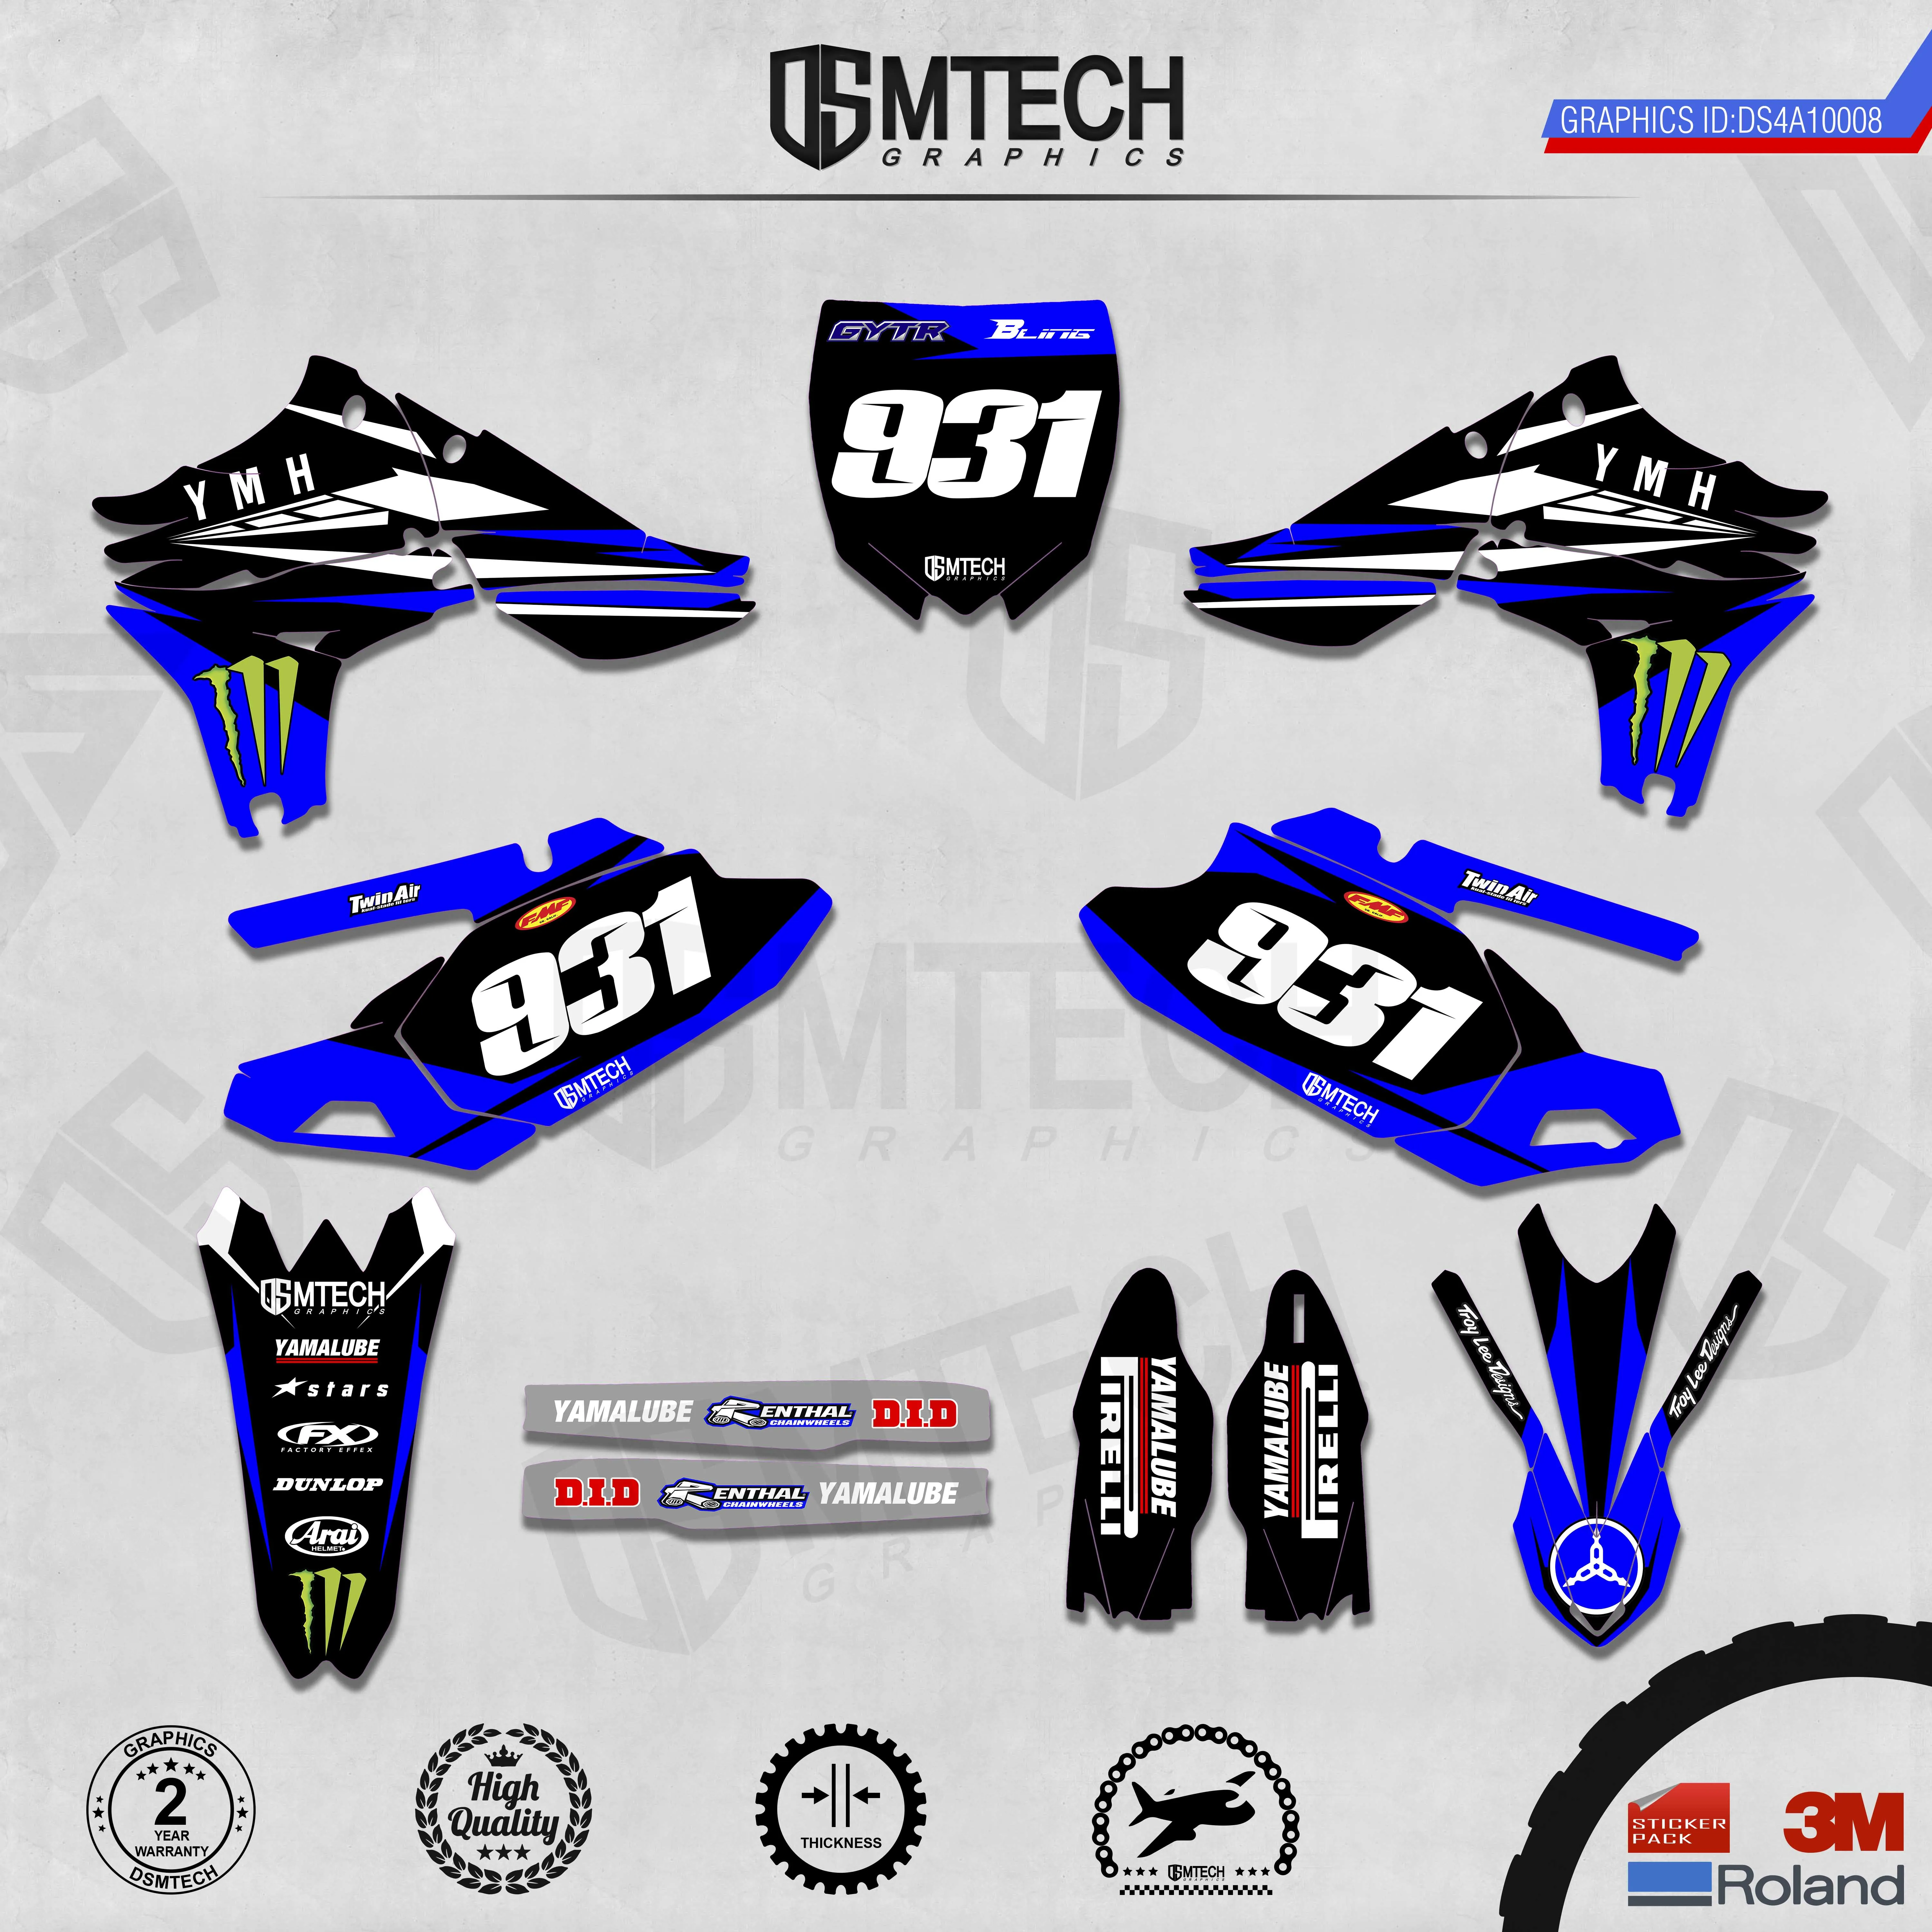 DSMTECH Customized Team Graphics Backgrounds Decals 3M Custom Stickers For  YZF450 Two Stroke 2010-2013  008